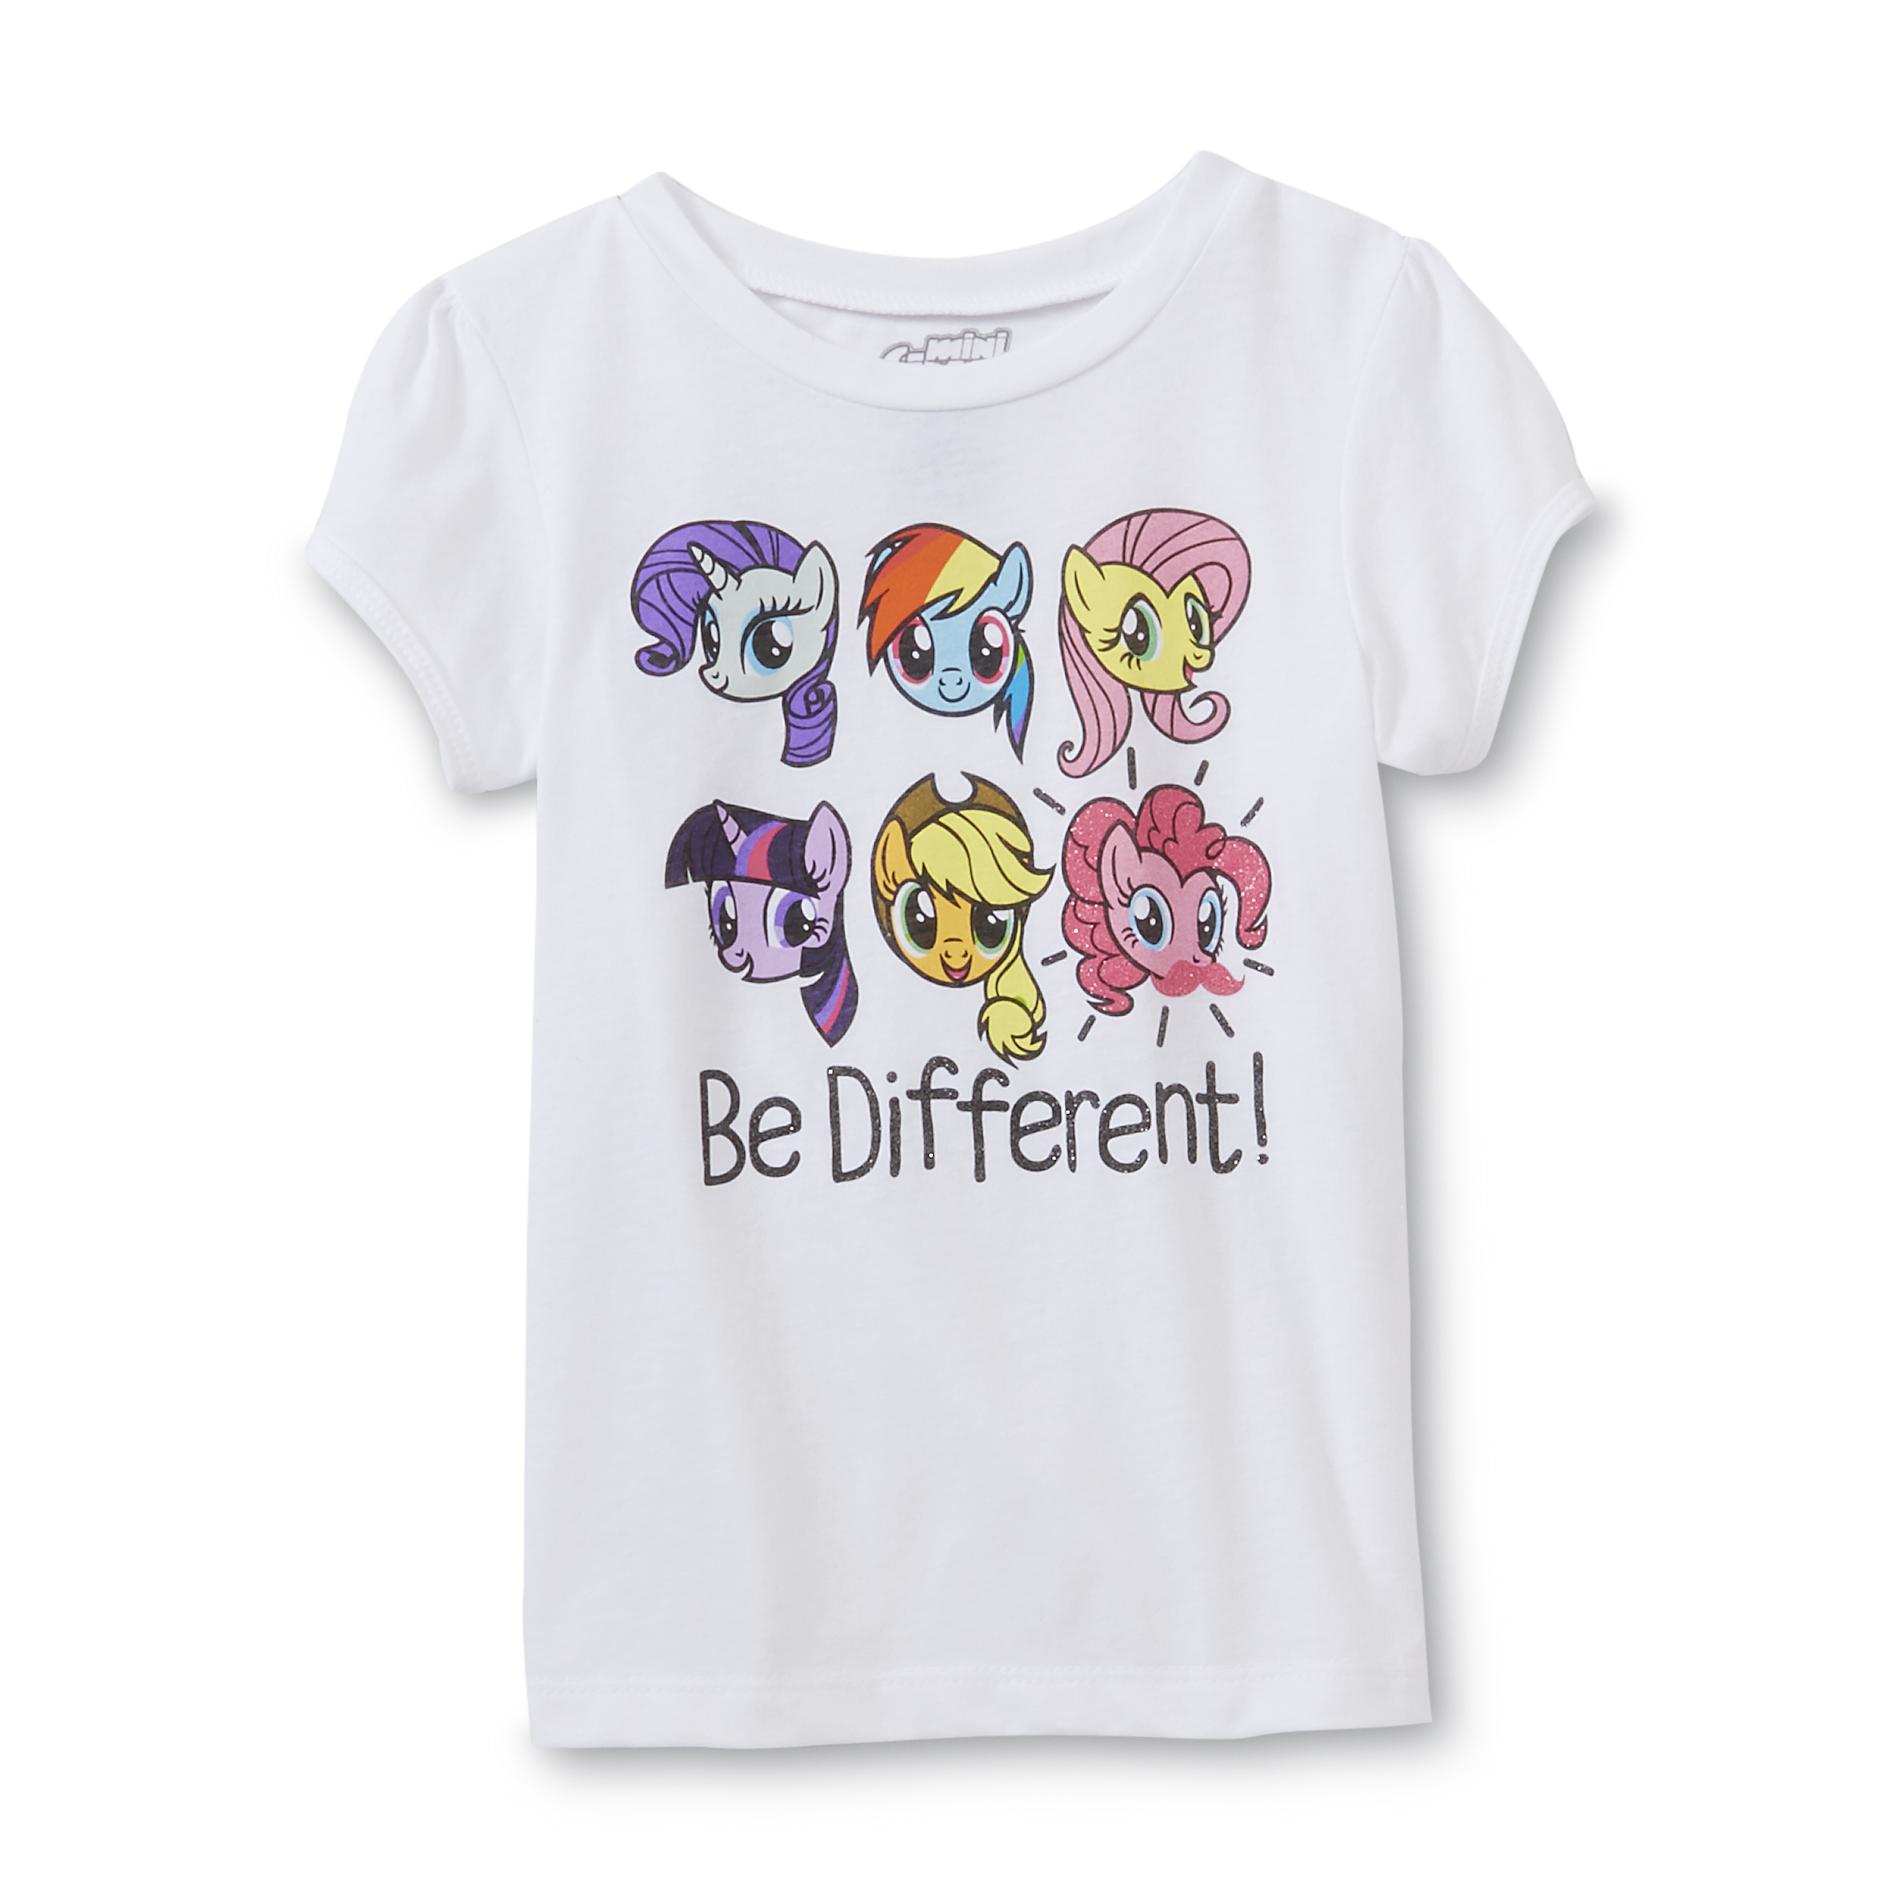 My Little Pony Girl's Graphic T-Shirt - Be Different